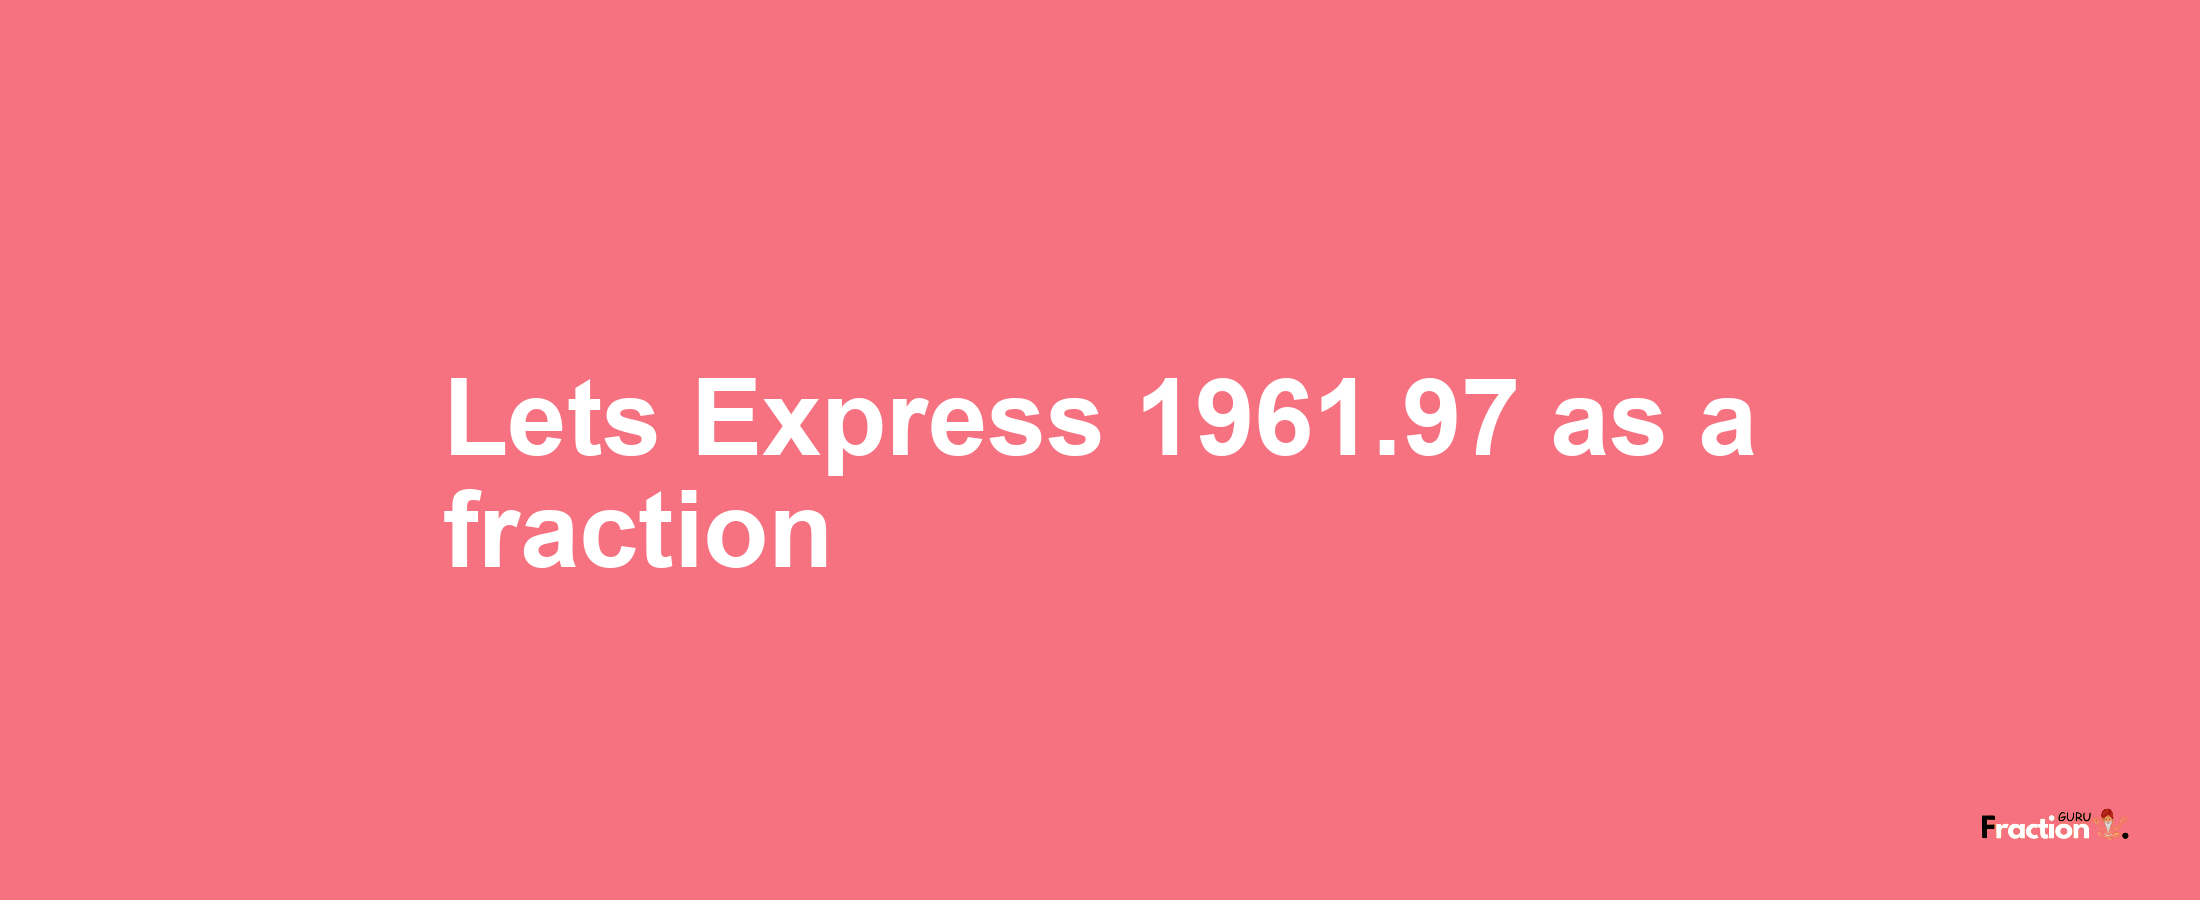 Lets Express 1961.97 as afraction